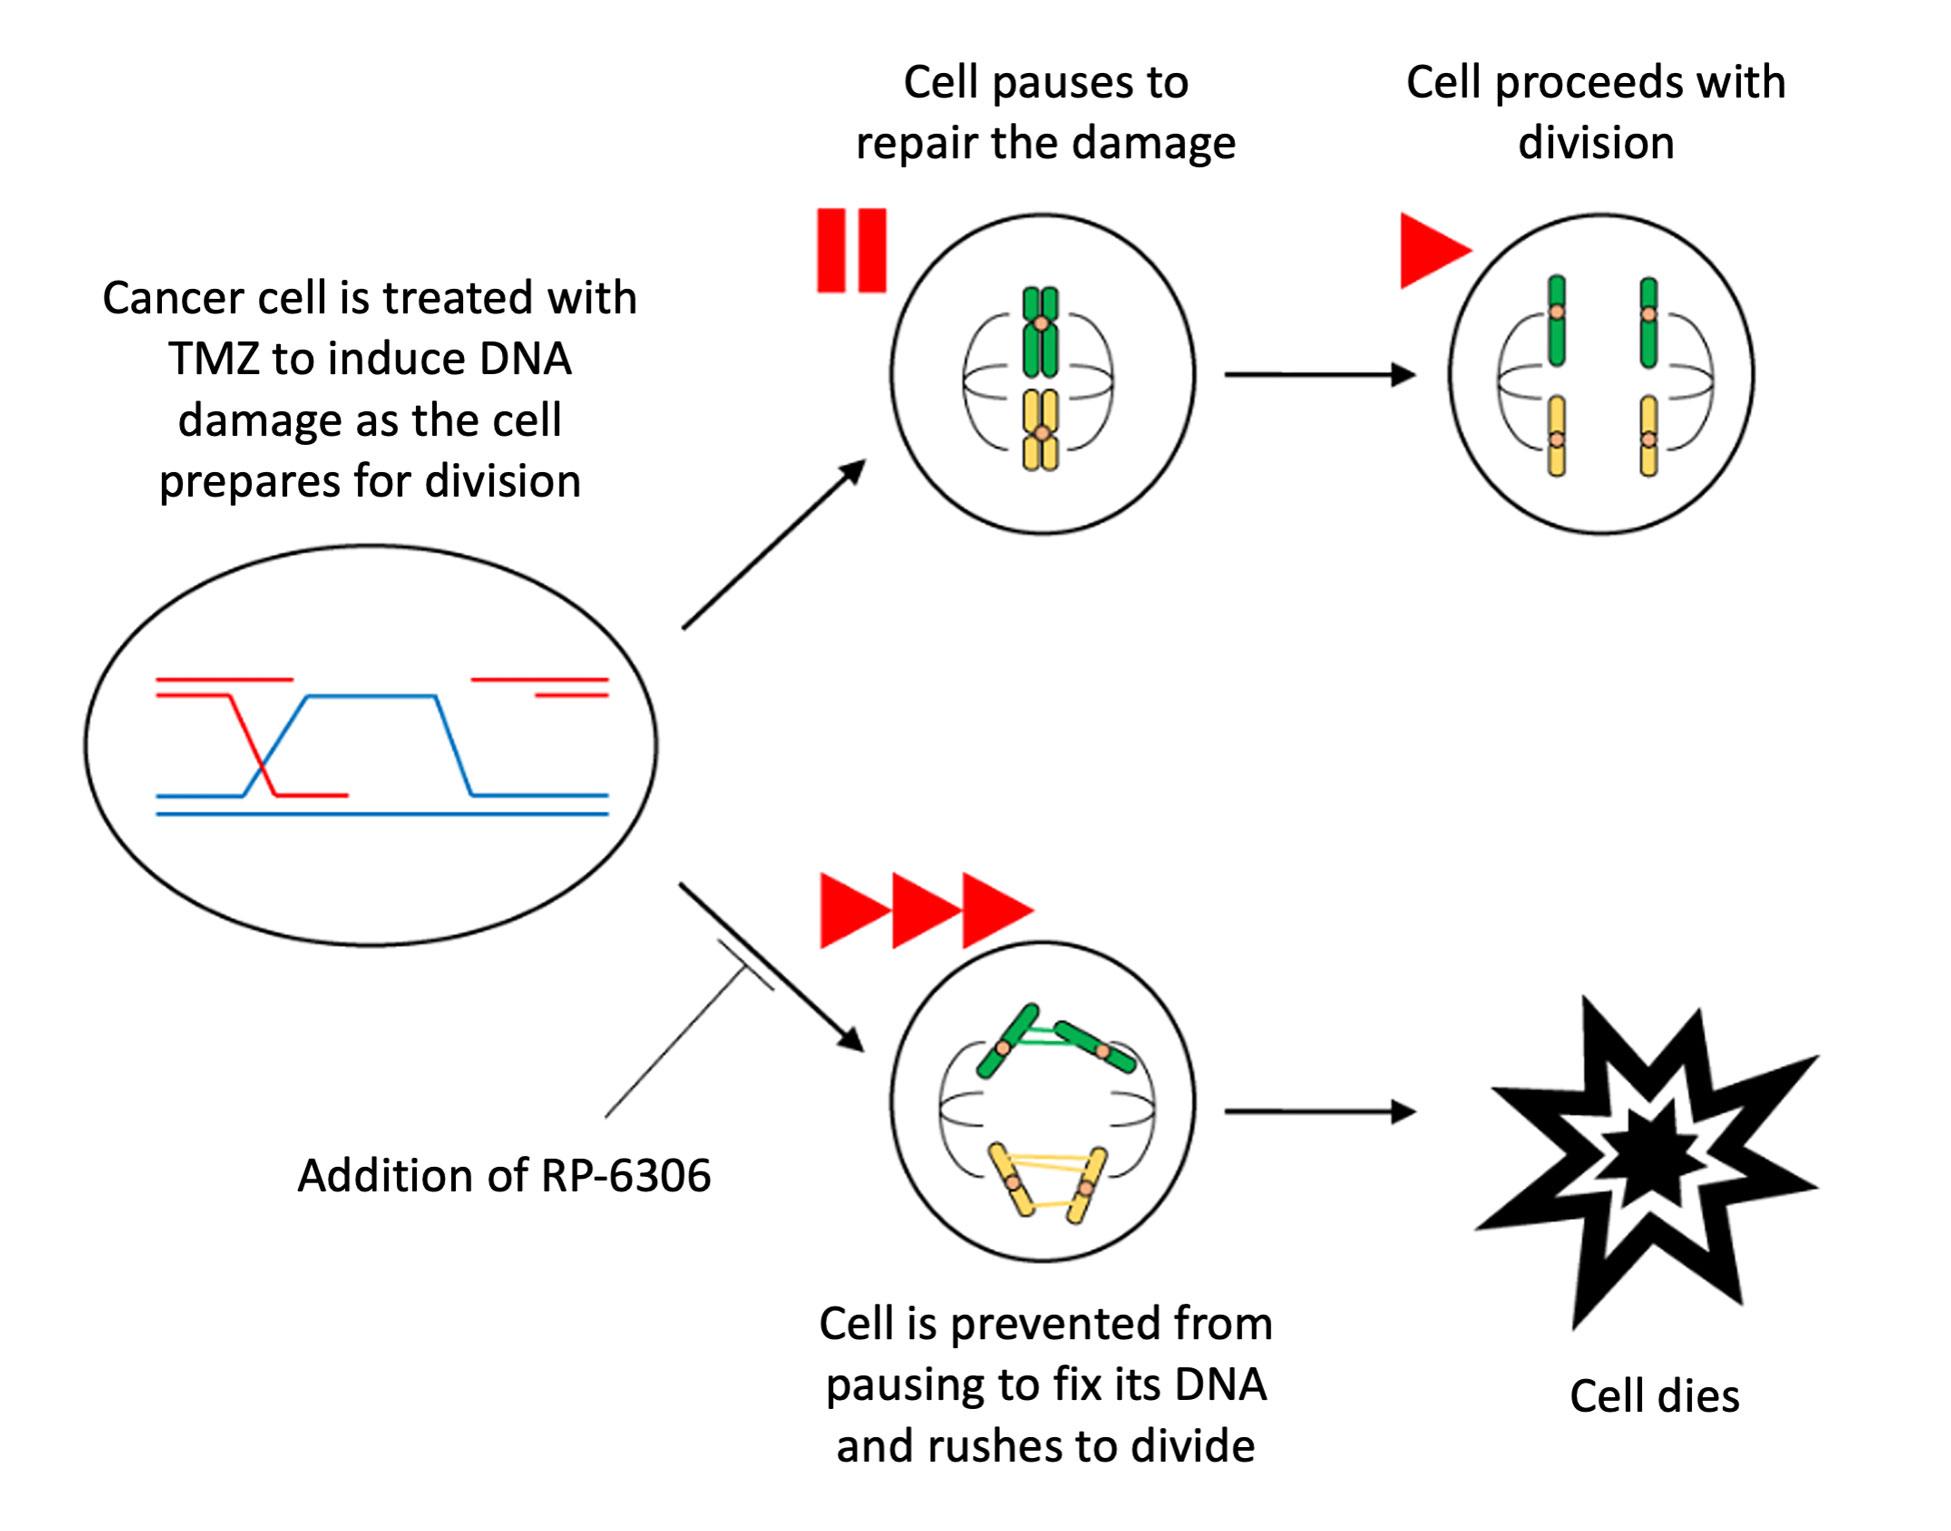 Diagram showing that cancer cells treated with TMZ can pause the cell cycle and repair themselves before splitting into two daughter cells. However, adding RP-6306 rushes the cells through the cell cycle and kills them. 